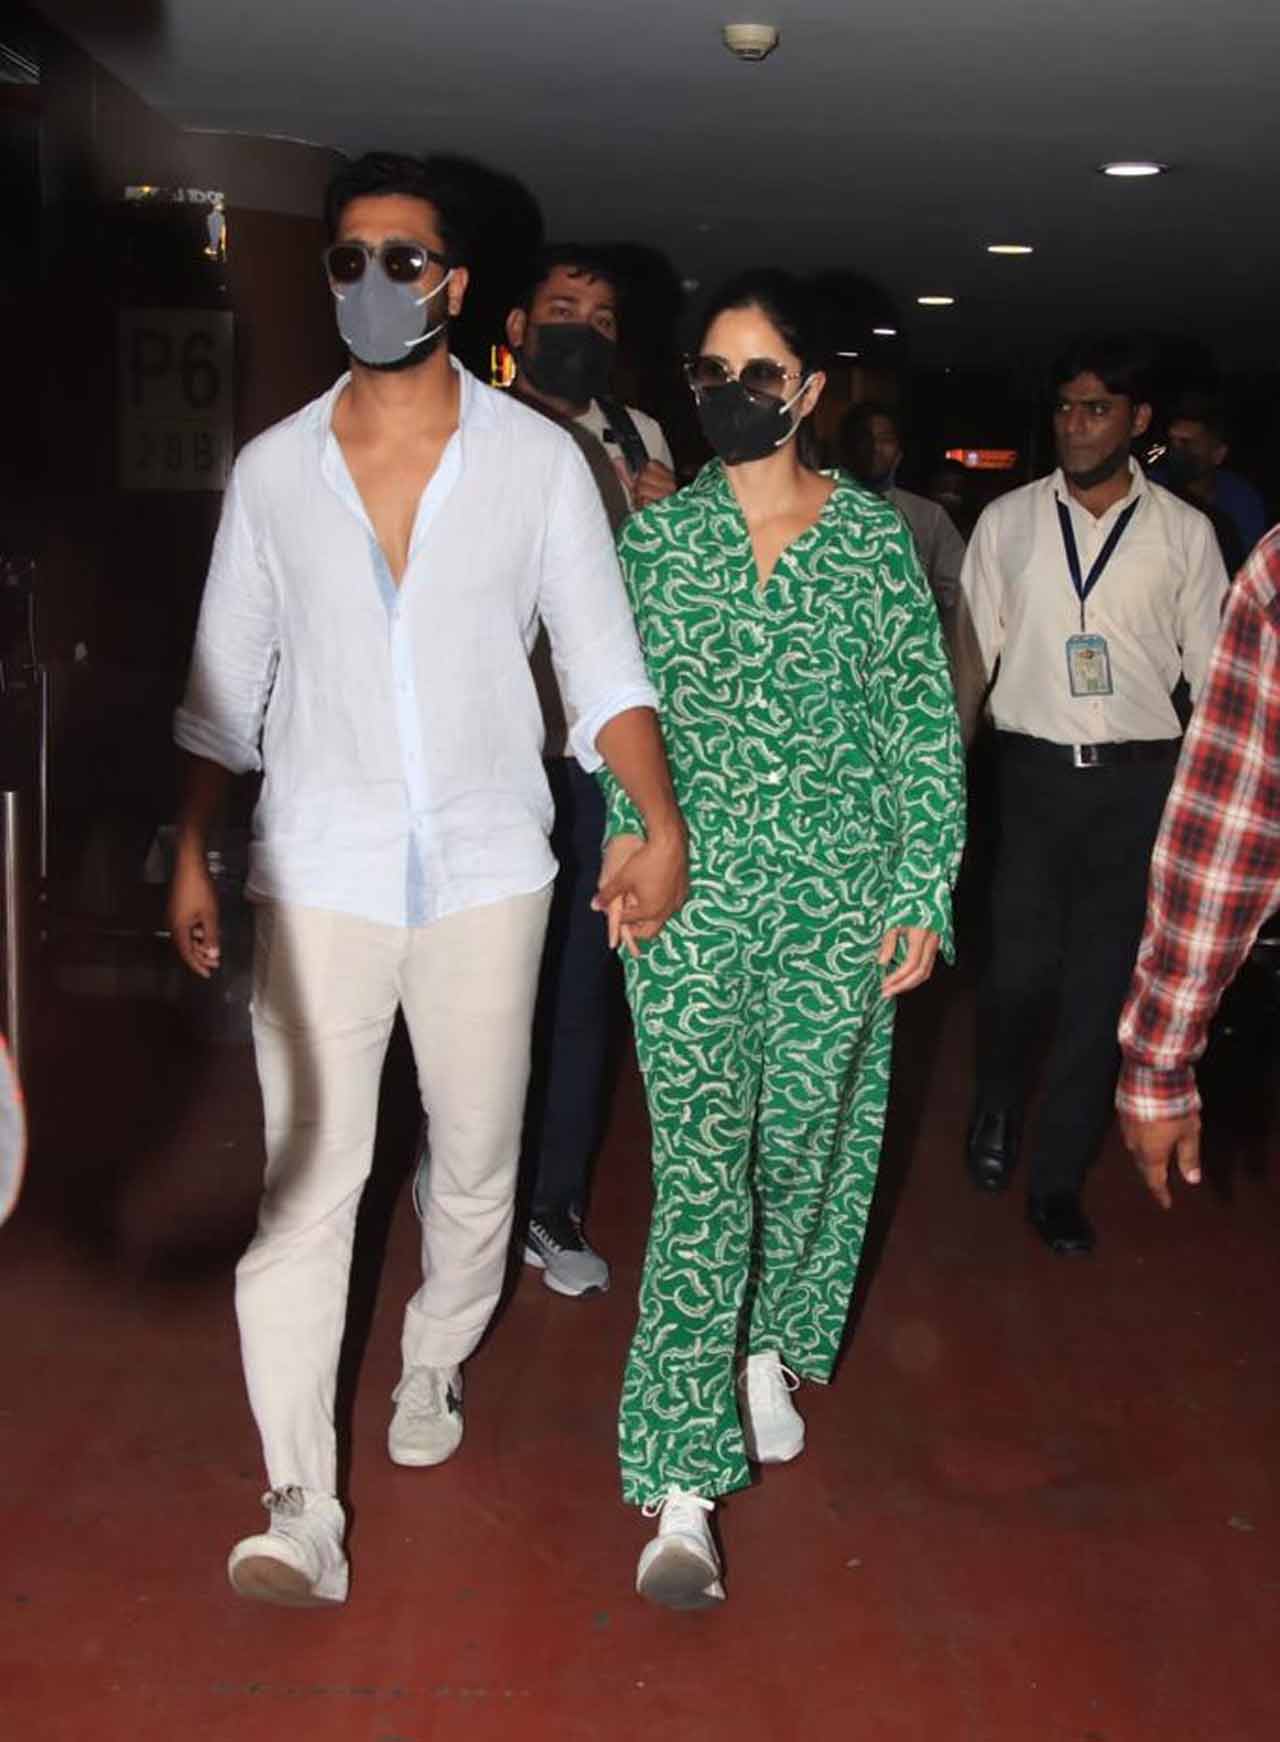 Star couple Vicky Kaushal and Katrina Kaif have returned to Mumbai after enjoying a tropical getaway. Pictures of the duo have been doing rounds on the internet.